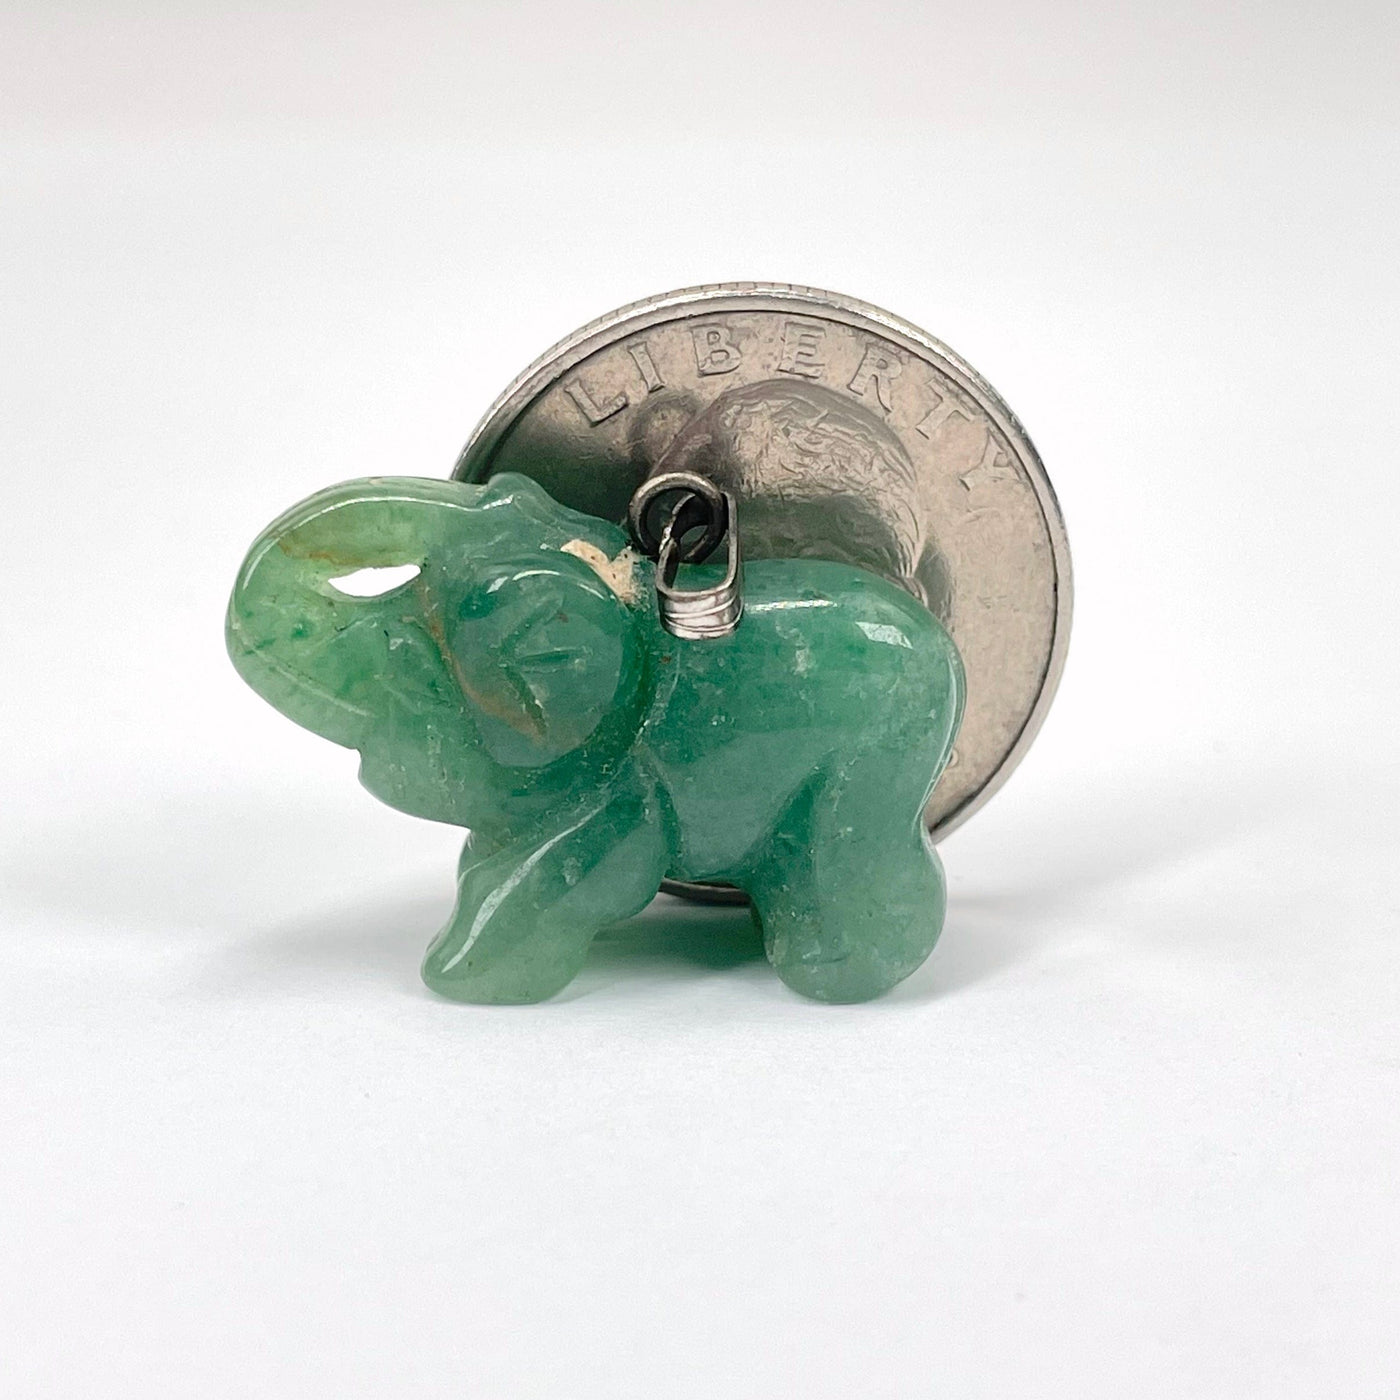 close up of green quartz elephant pendants with quarter for size reference